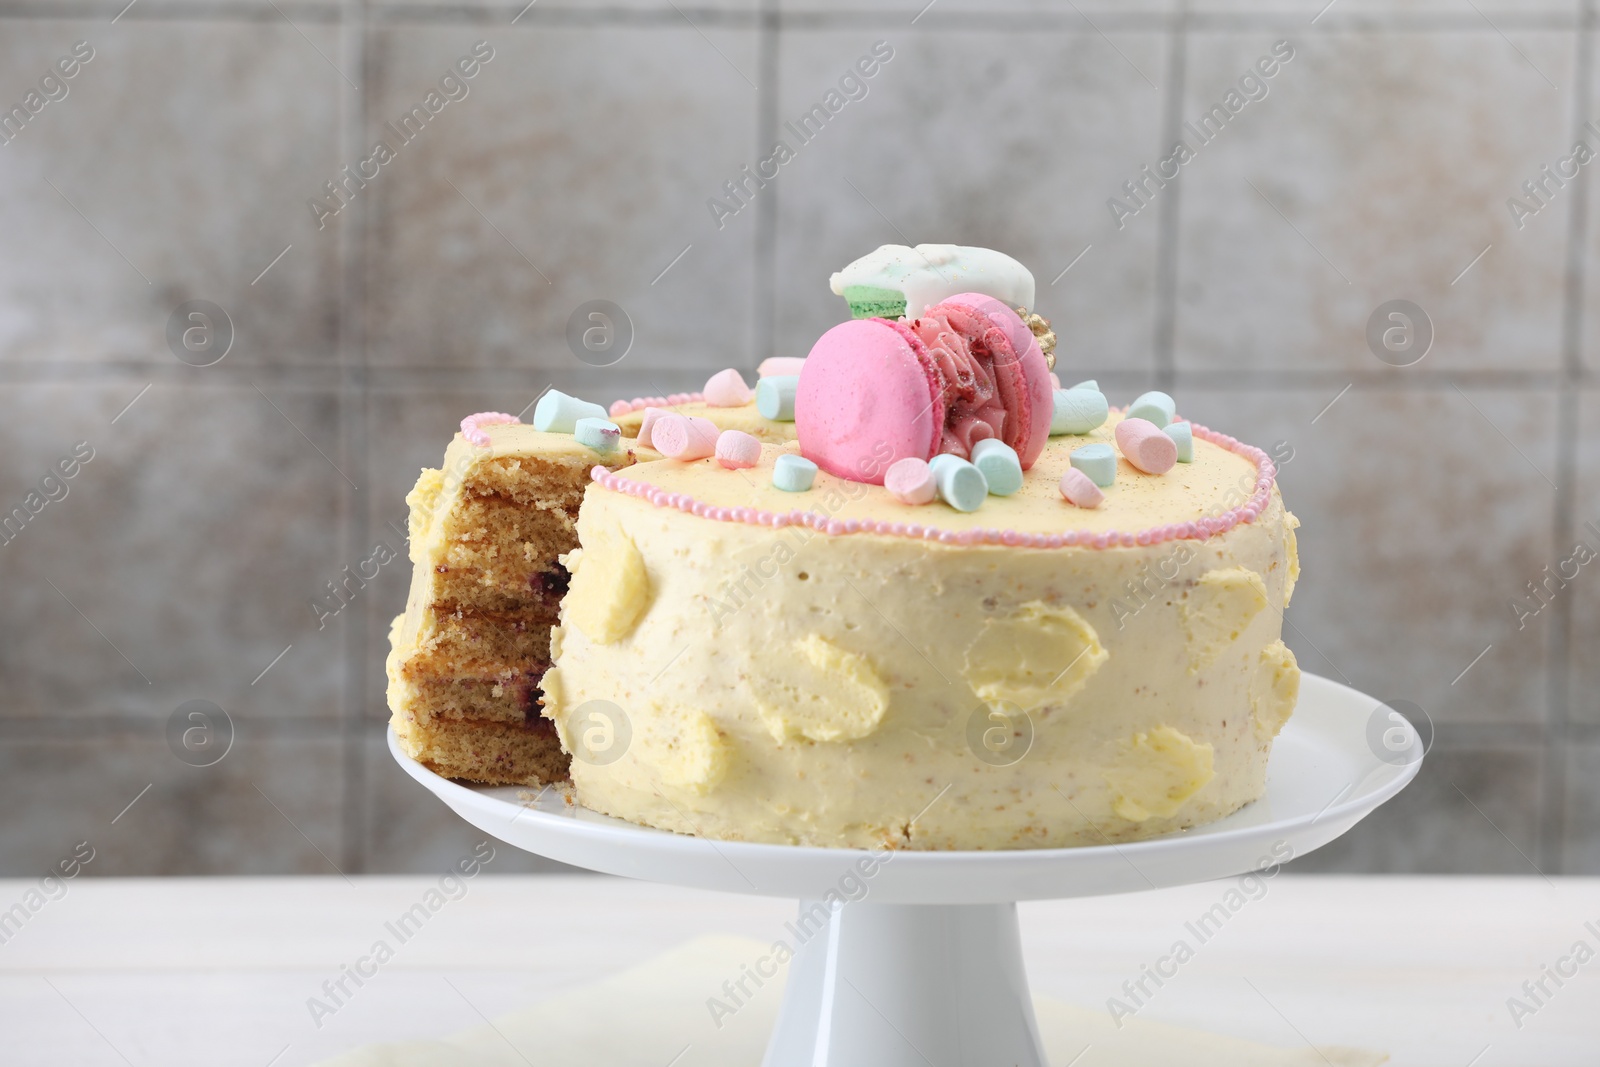 Photo of Delicious cake decorated with macarons and marshmallows on white table against tiled background, closeup